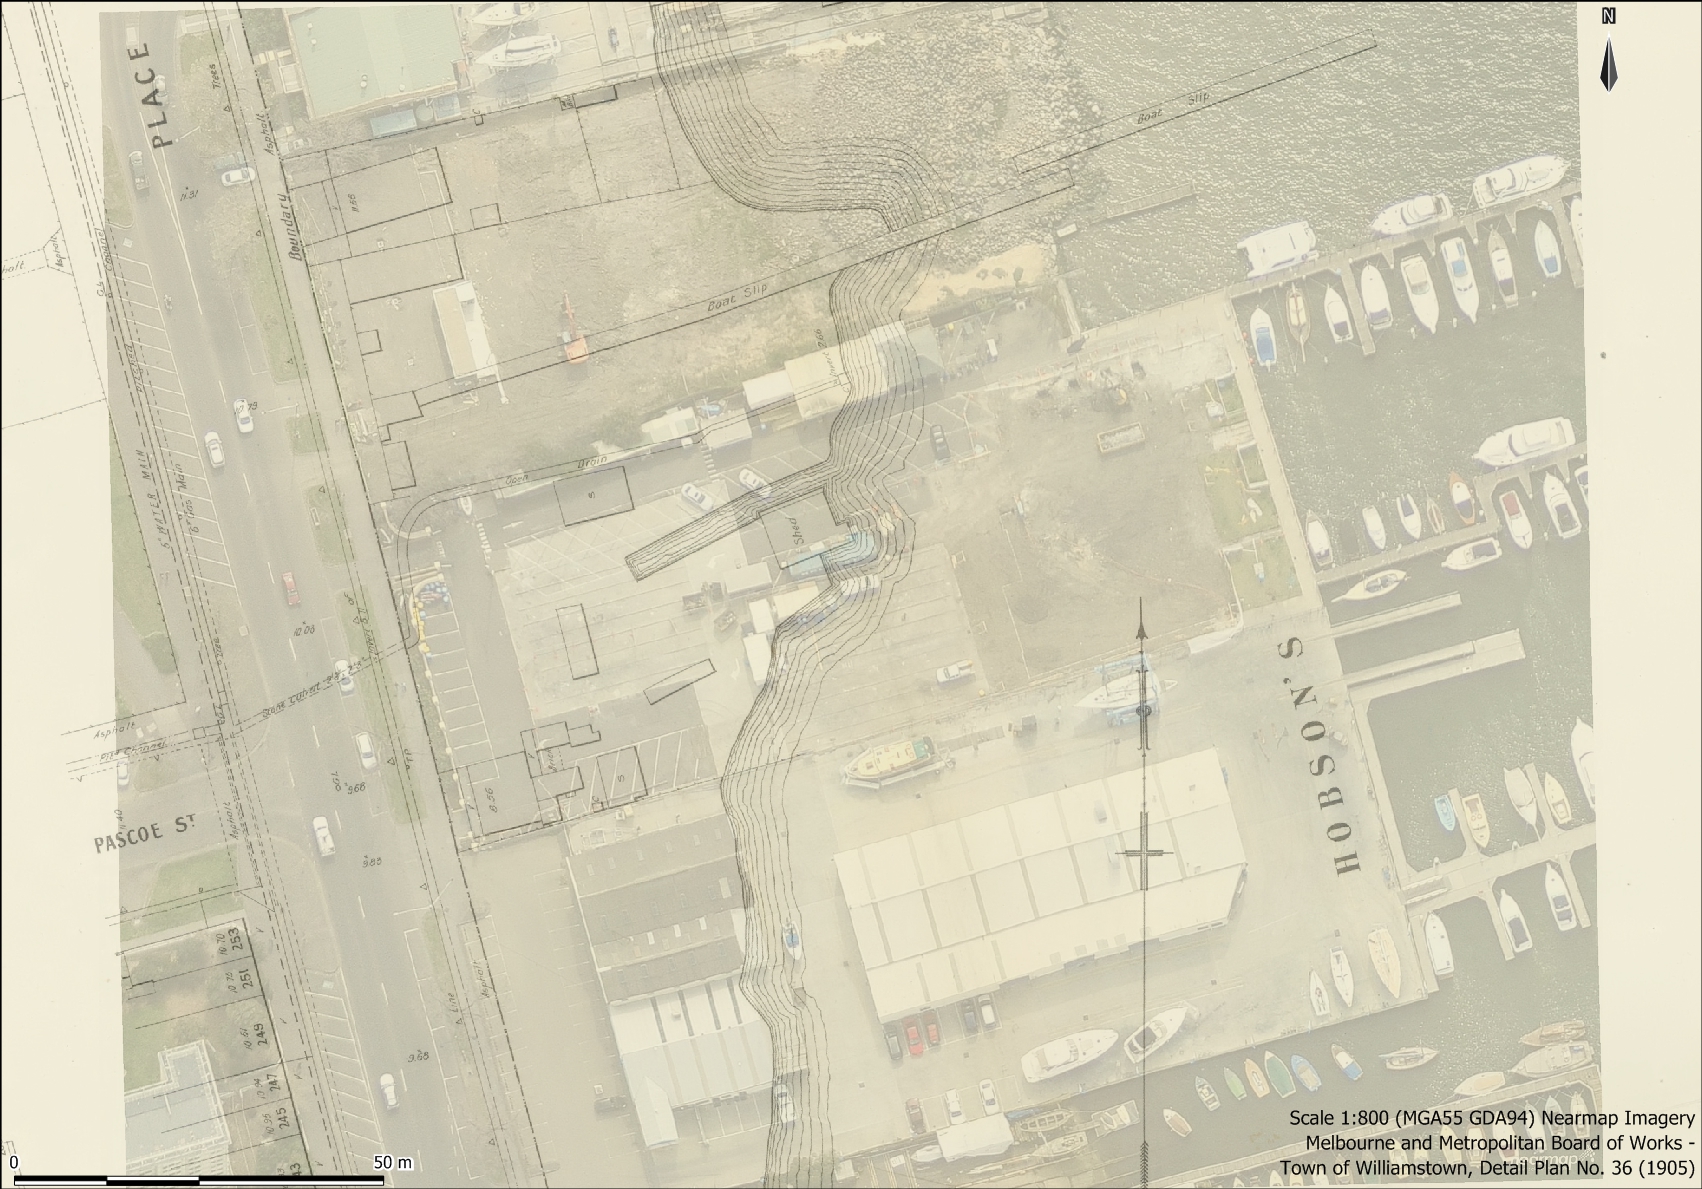 MMBW 1905 Map overlaid on 2014 aerial imagery